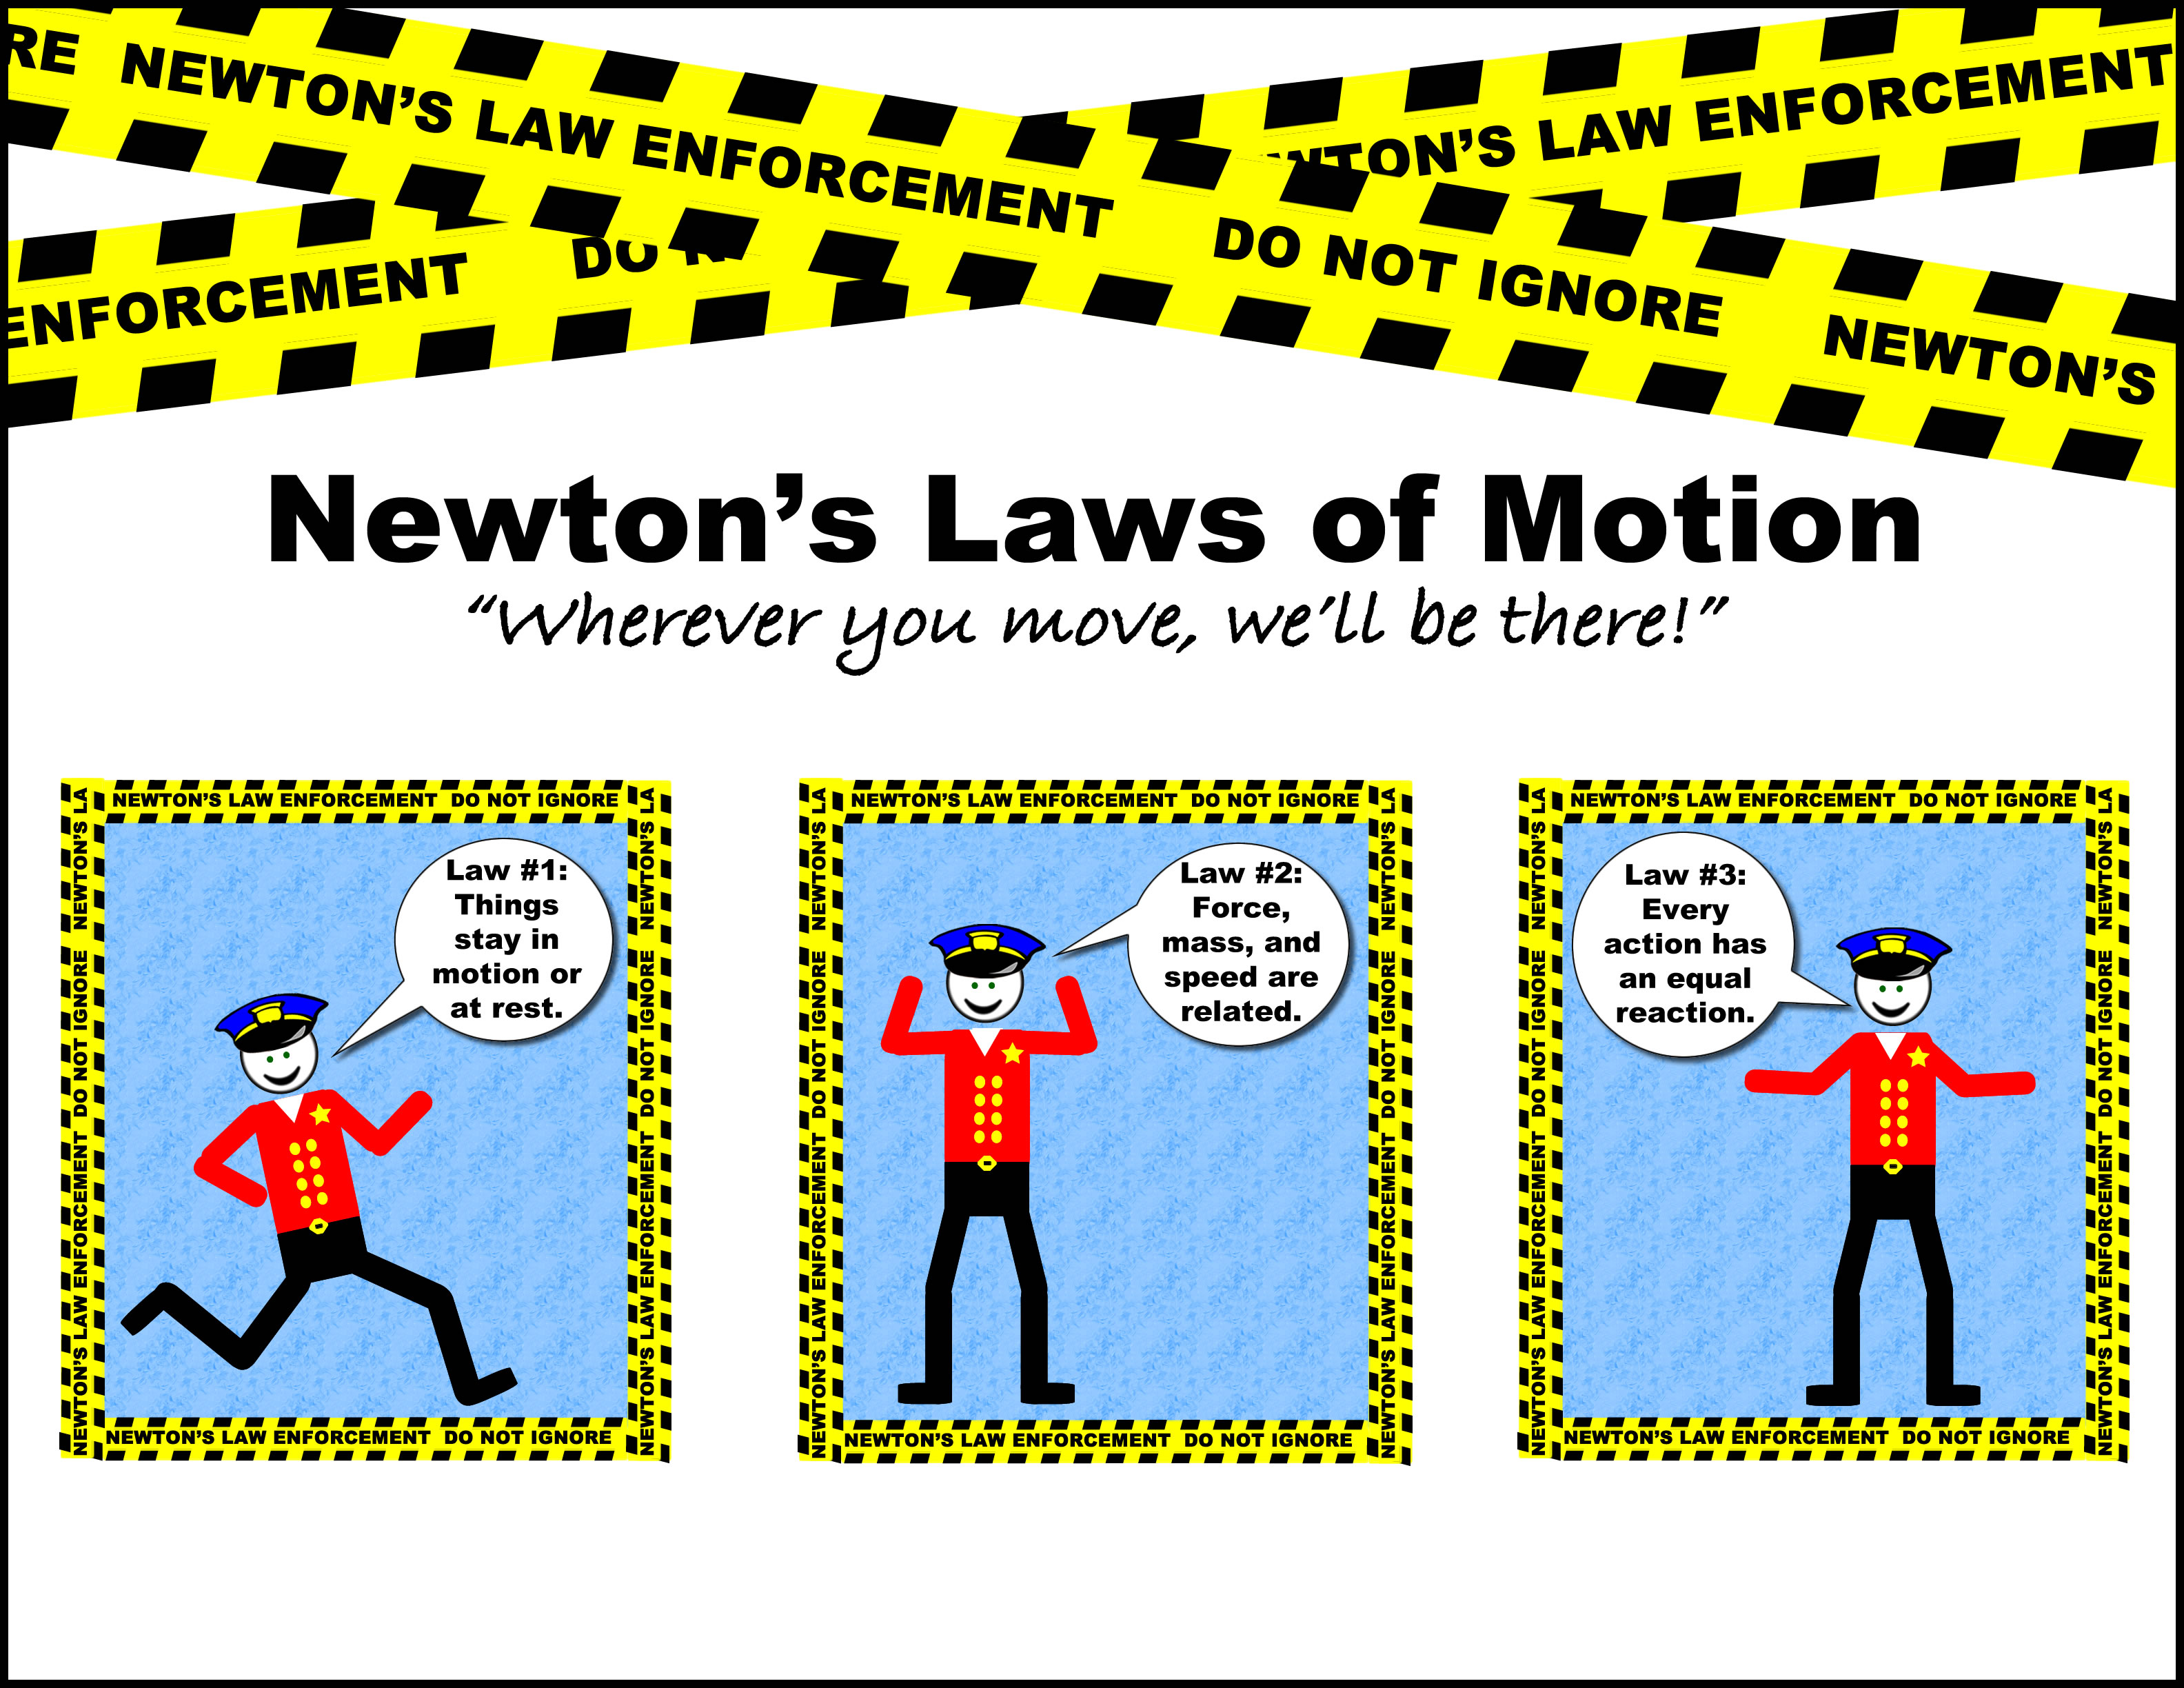 law of motion